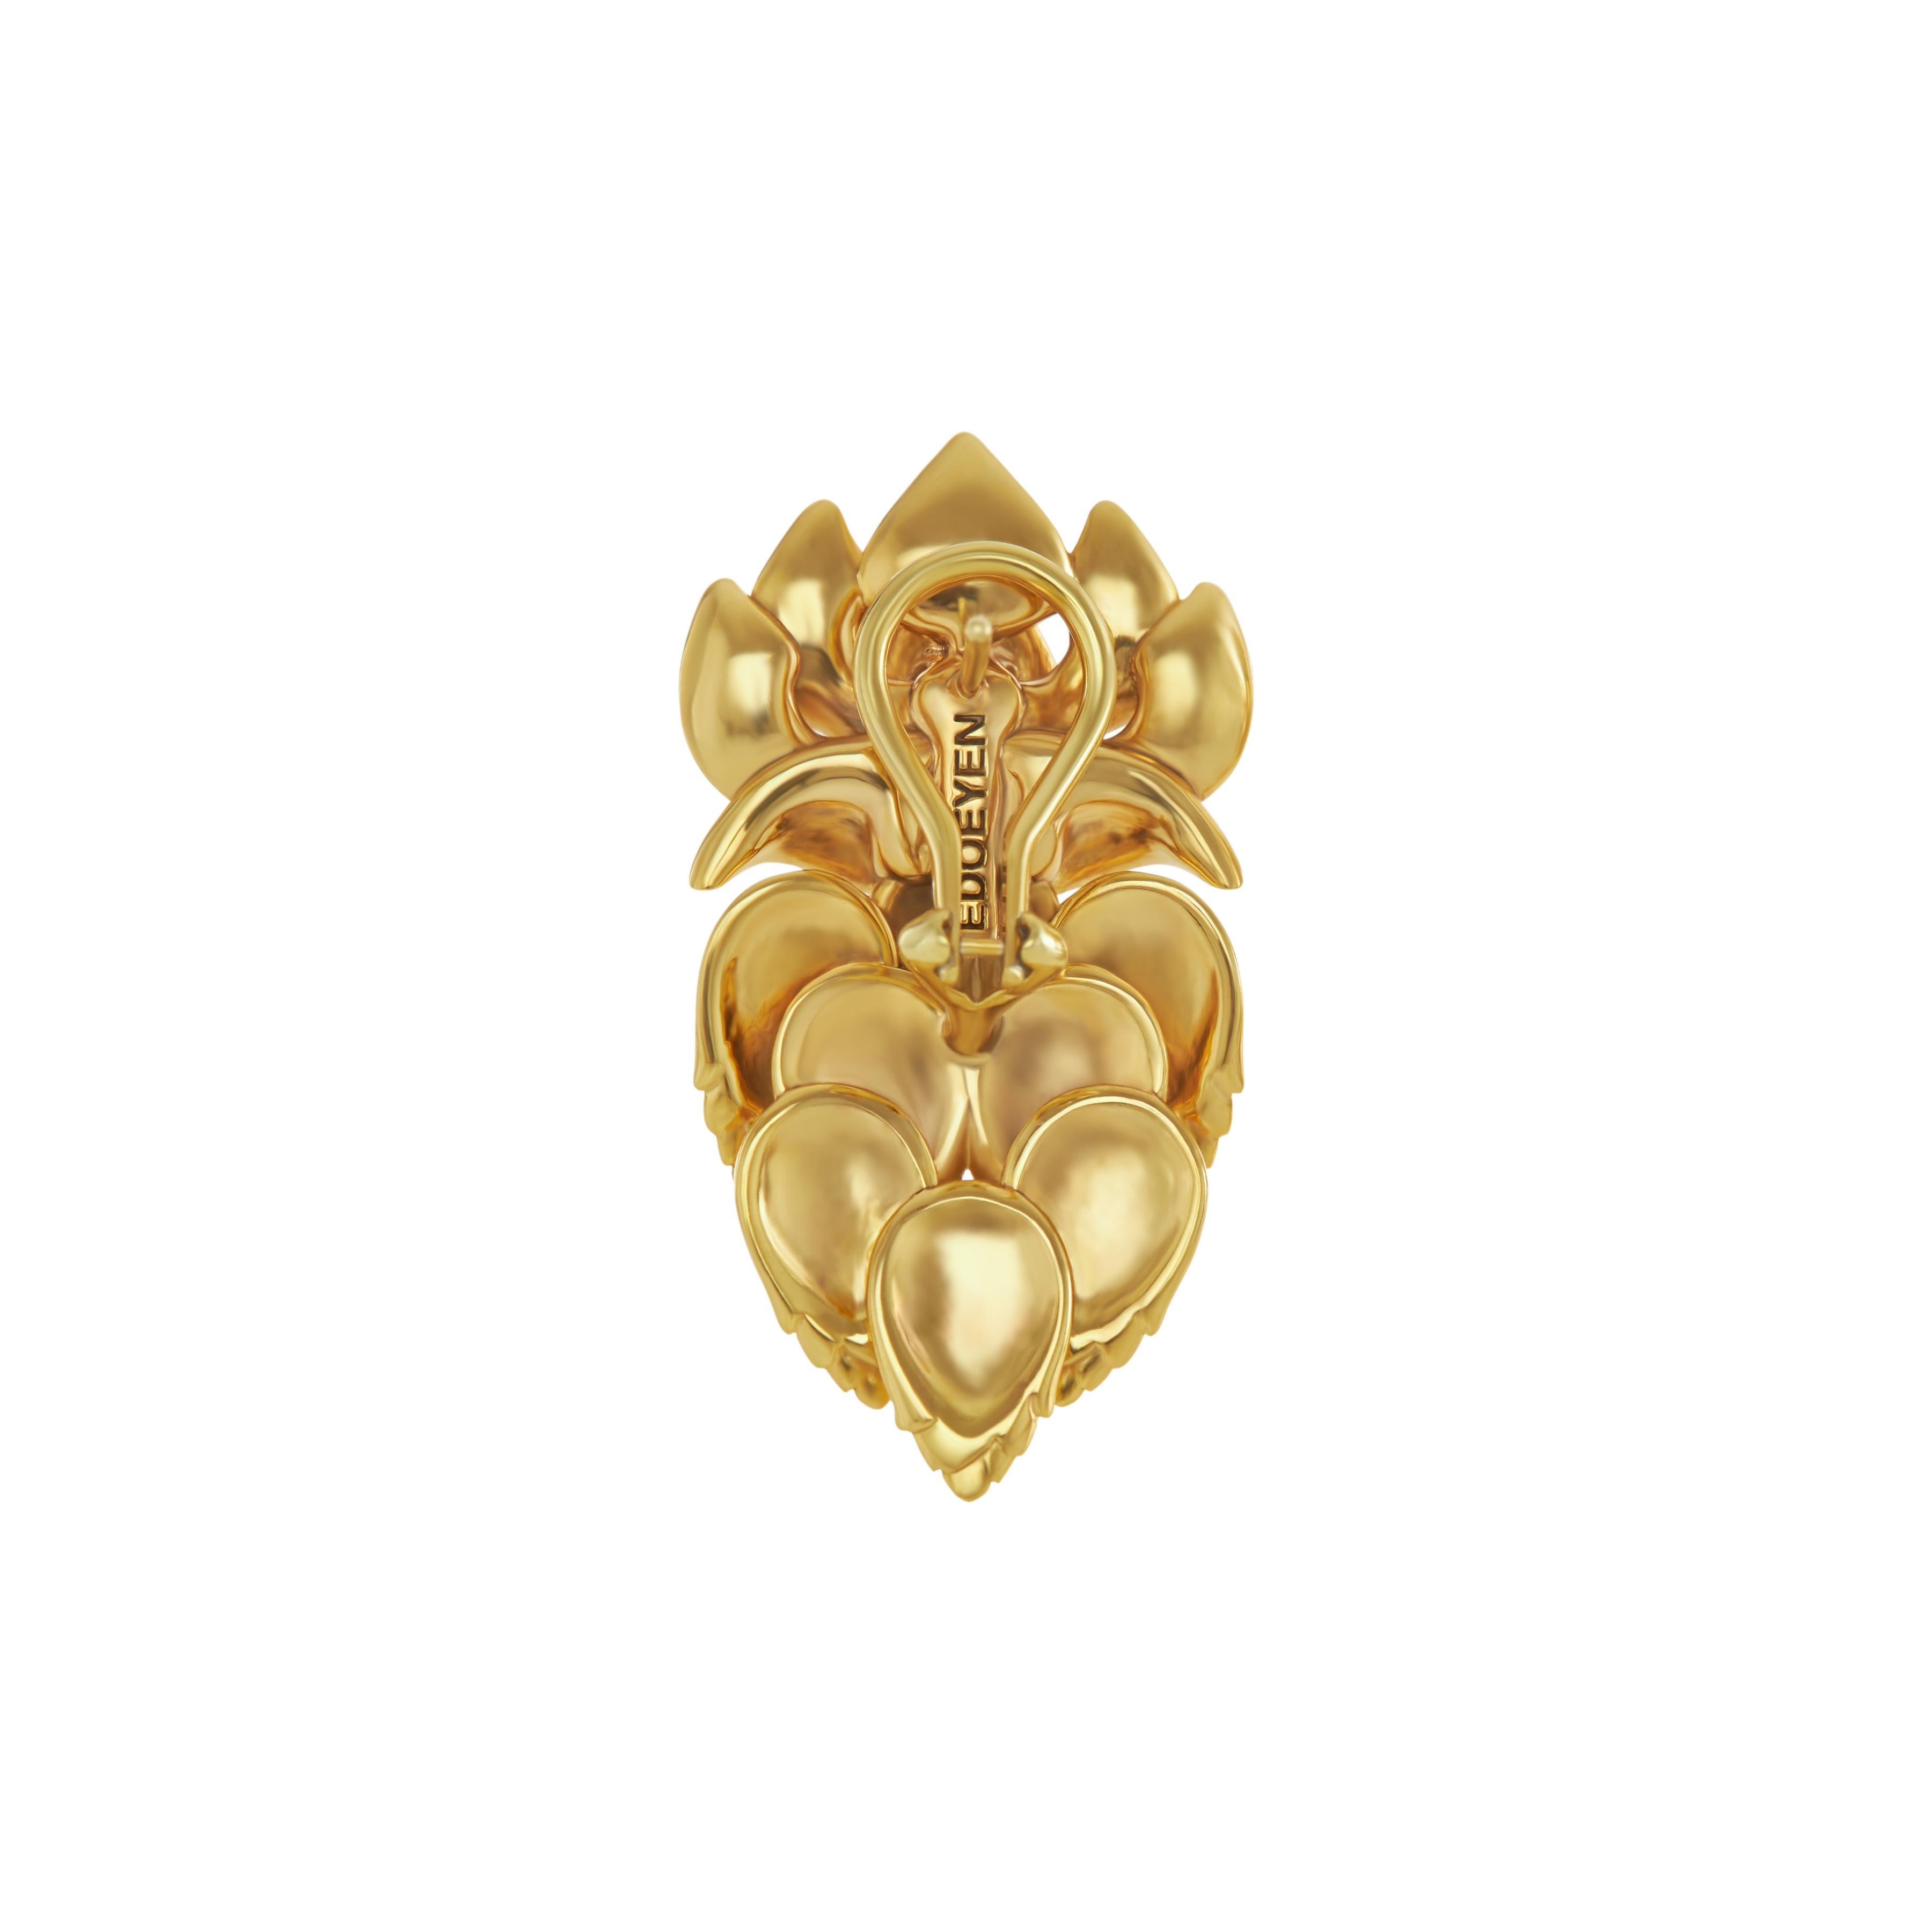 ○ 18k gold-plated ○ High quality and shiny finish ○ Architecturally shaped for a high-relief sculptural effect ○ Features the revered lotus flower capturing its beauty in two life phases ○ Oversized clip and post for added luxe and stability ○